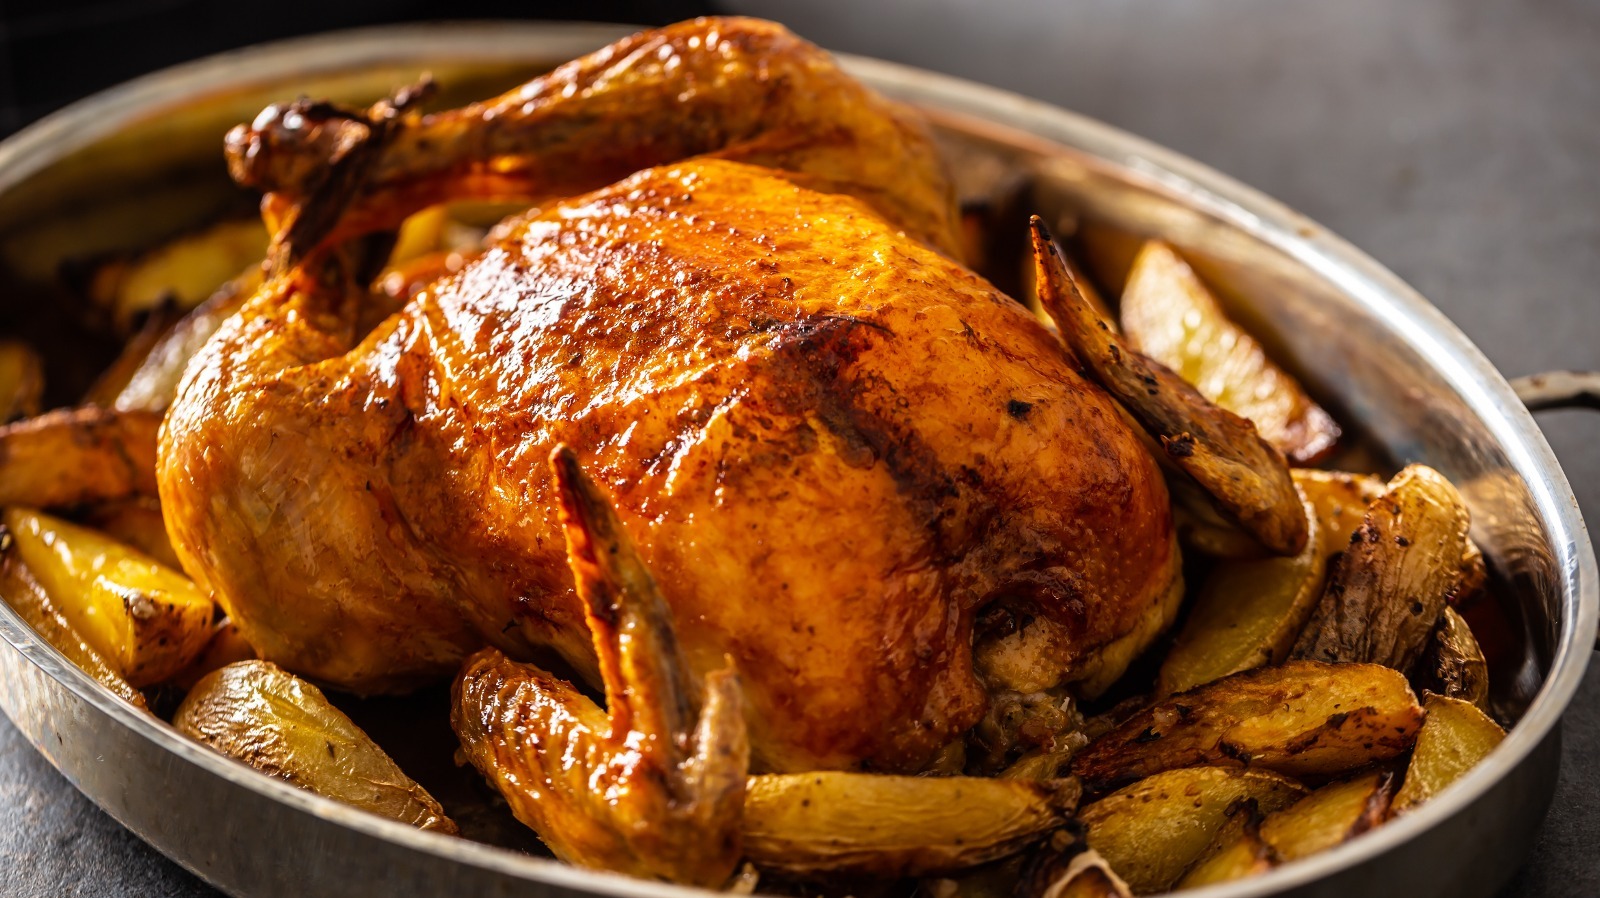 The Best Turkey Roasting Pans for Thanksgiving